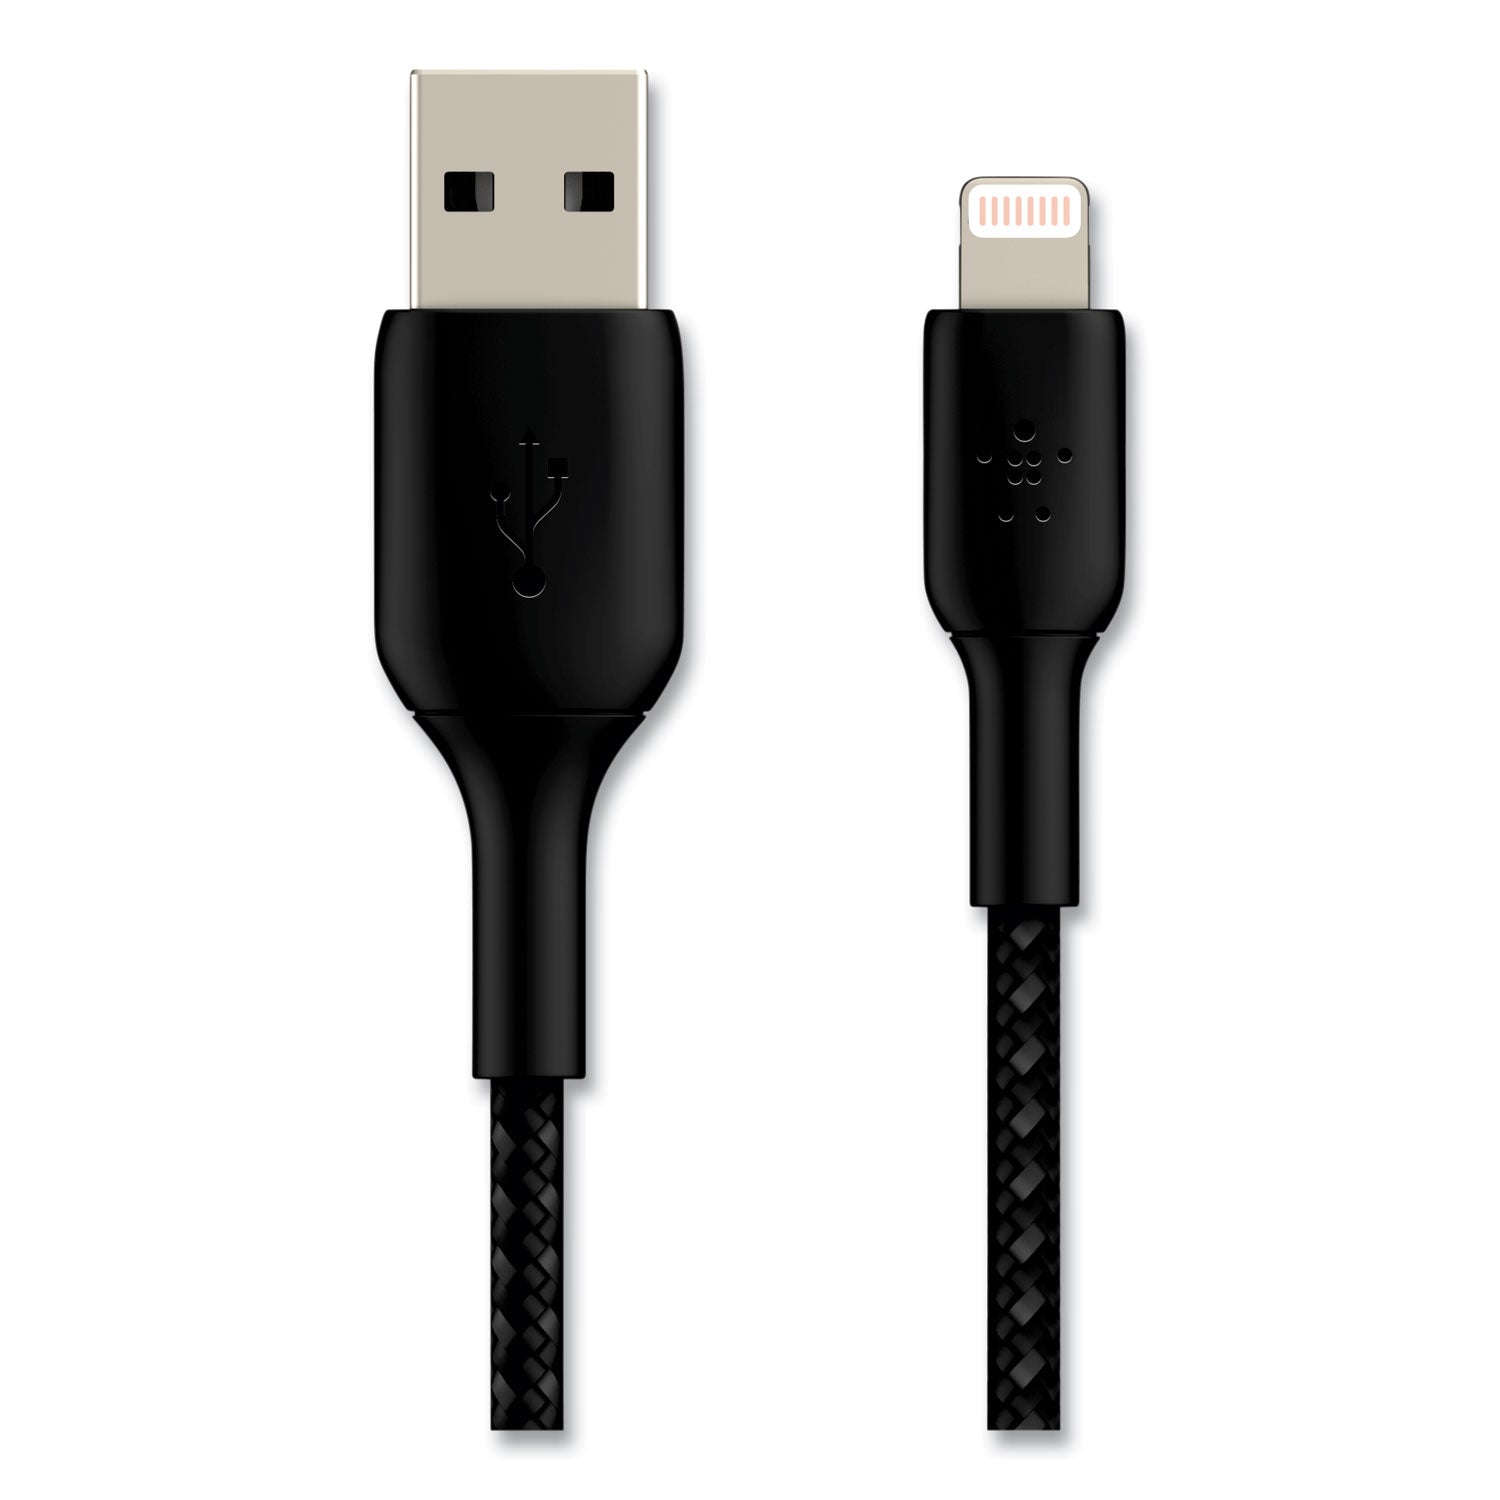 boost-charge-braided-apple-lightning-to-usb-a-chargesync-cable-66-ft-black_blkcaa002bt2mbk - 2